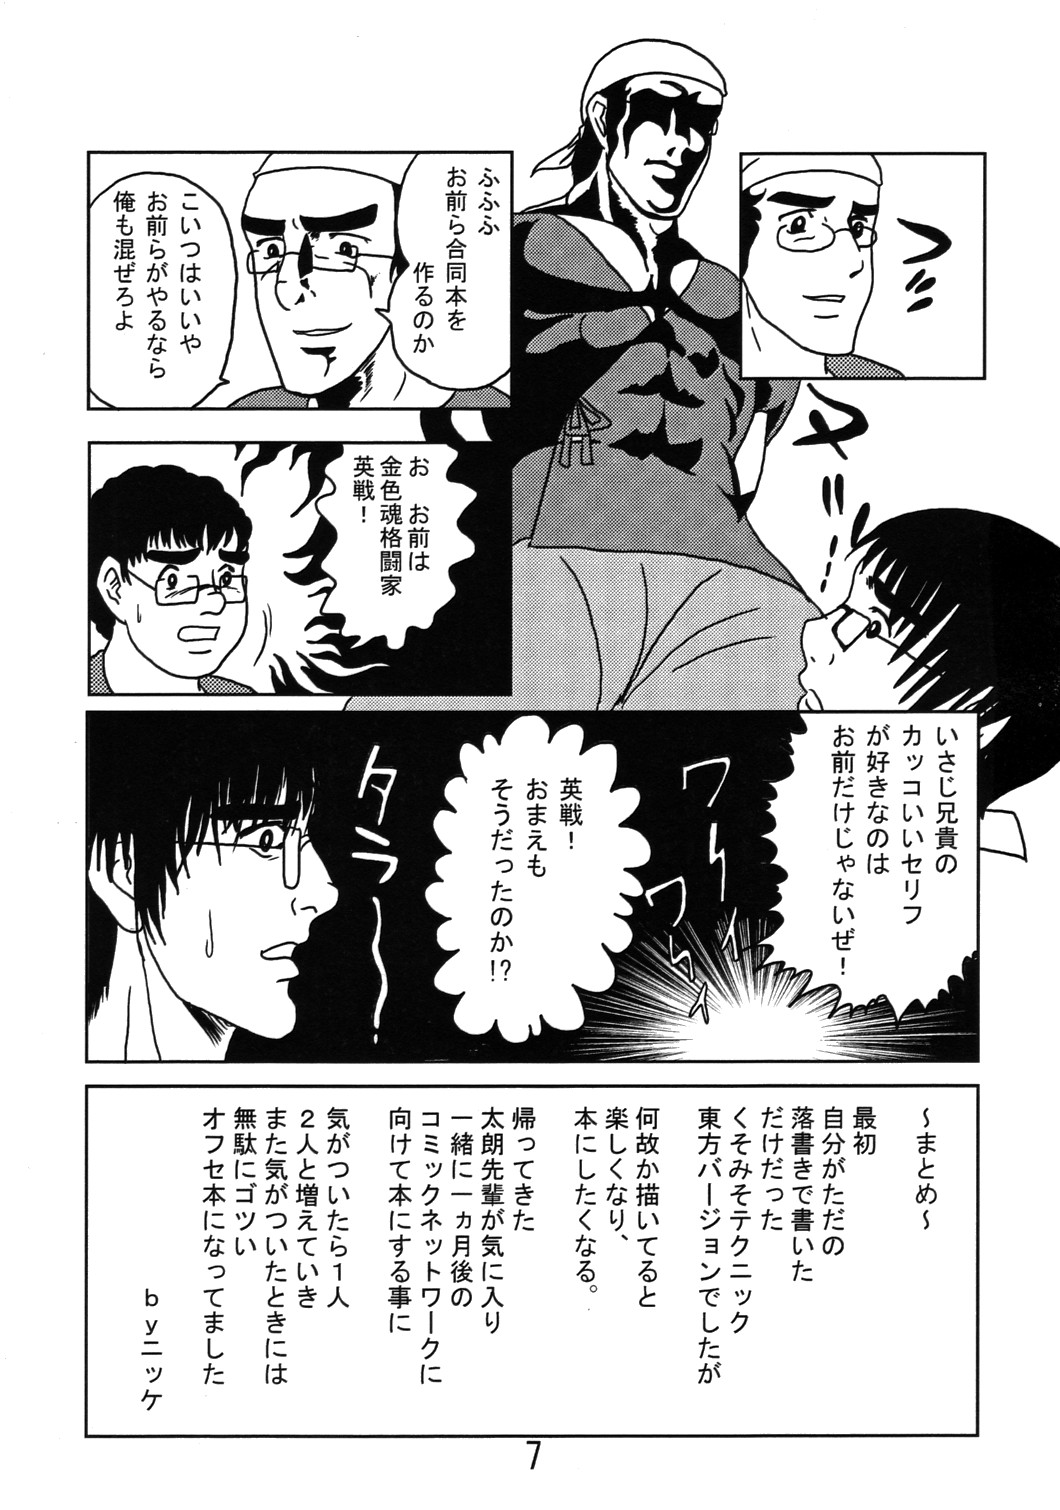 (Comic Network 25) [どアホ, 悪転奏進, Forever and ever... (福岡太朗, 英戦, 黒糖ニッケ)] くそみそルナティック (東方Project)